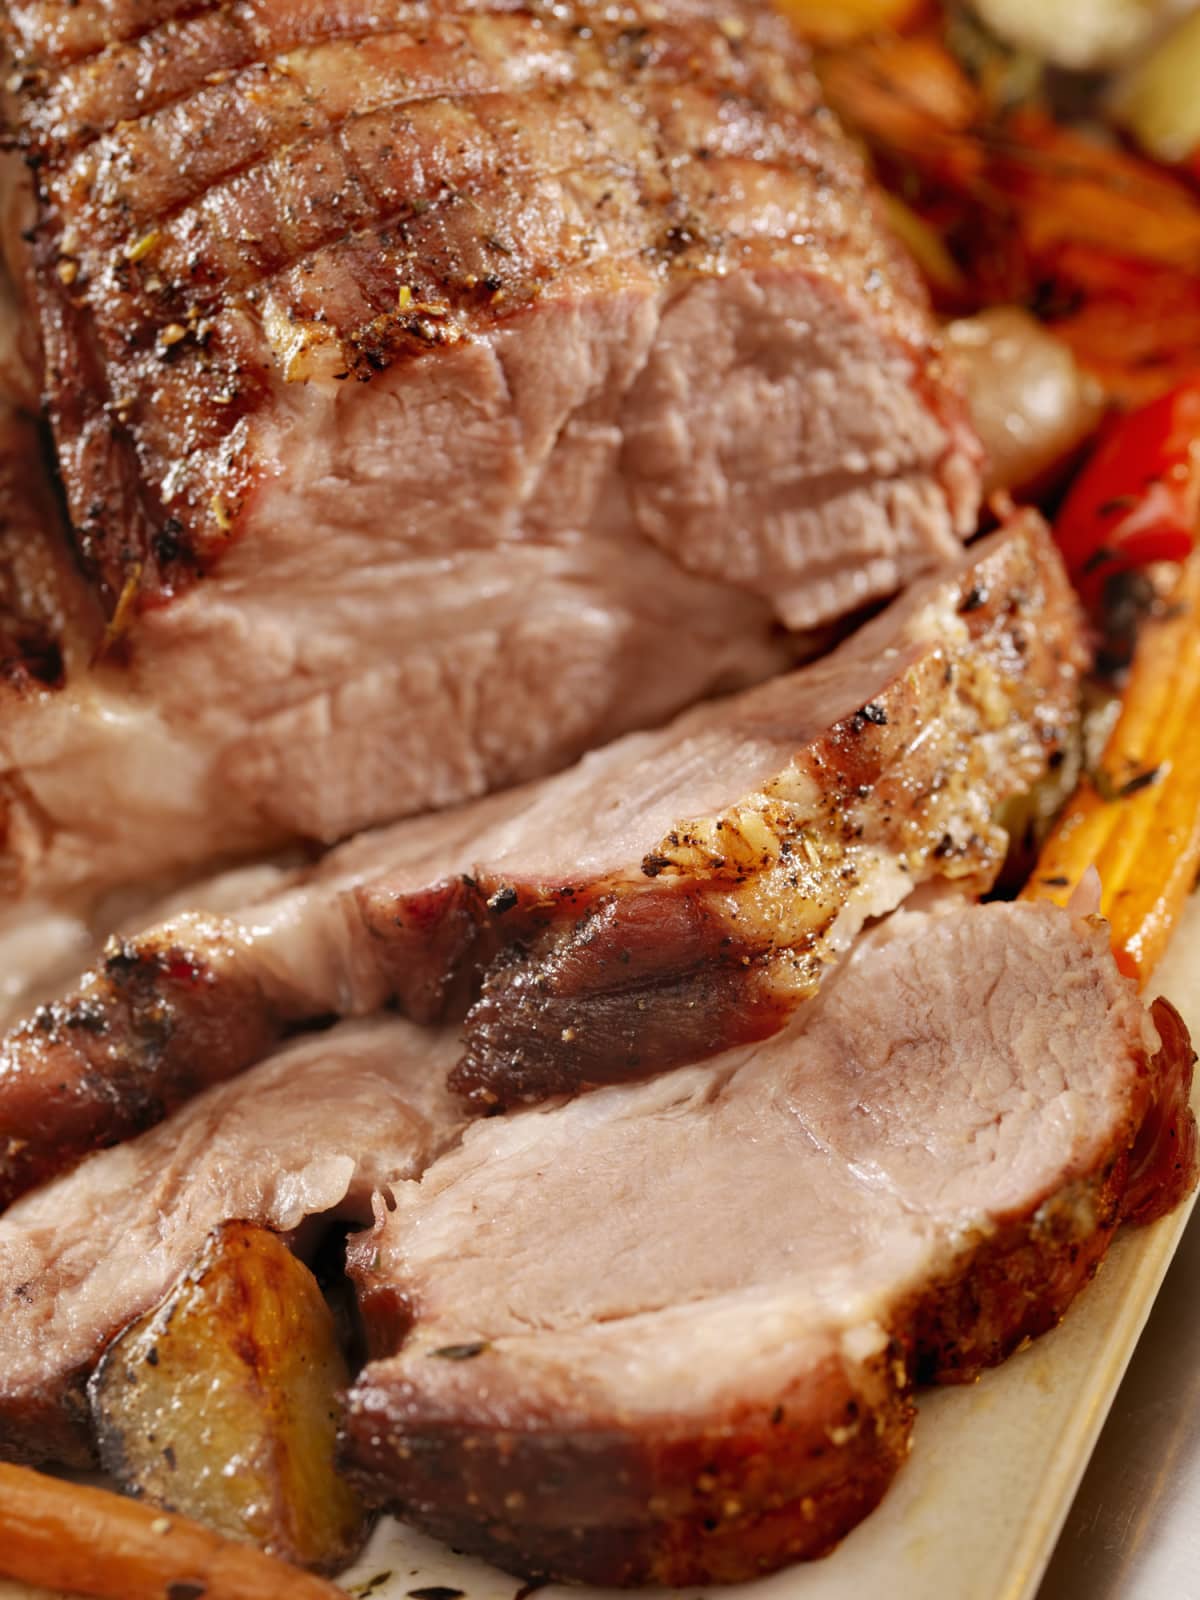 Pork Roast with Roasted Vegetables on a Platter -Photographed on Hasselblad H3D2-39mb Camera